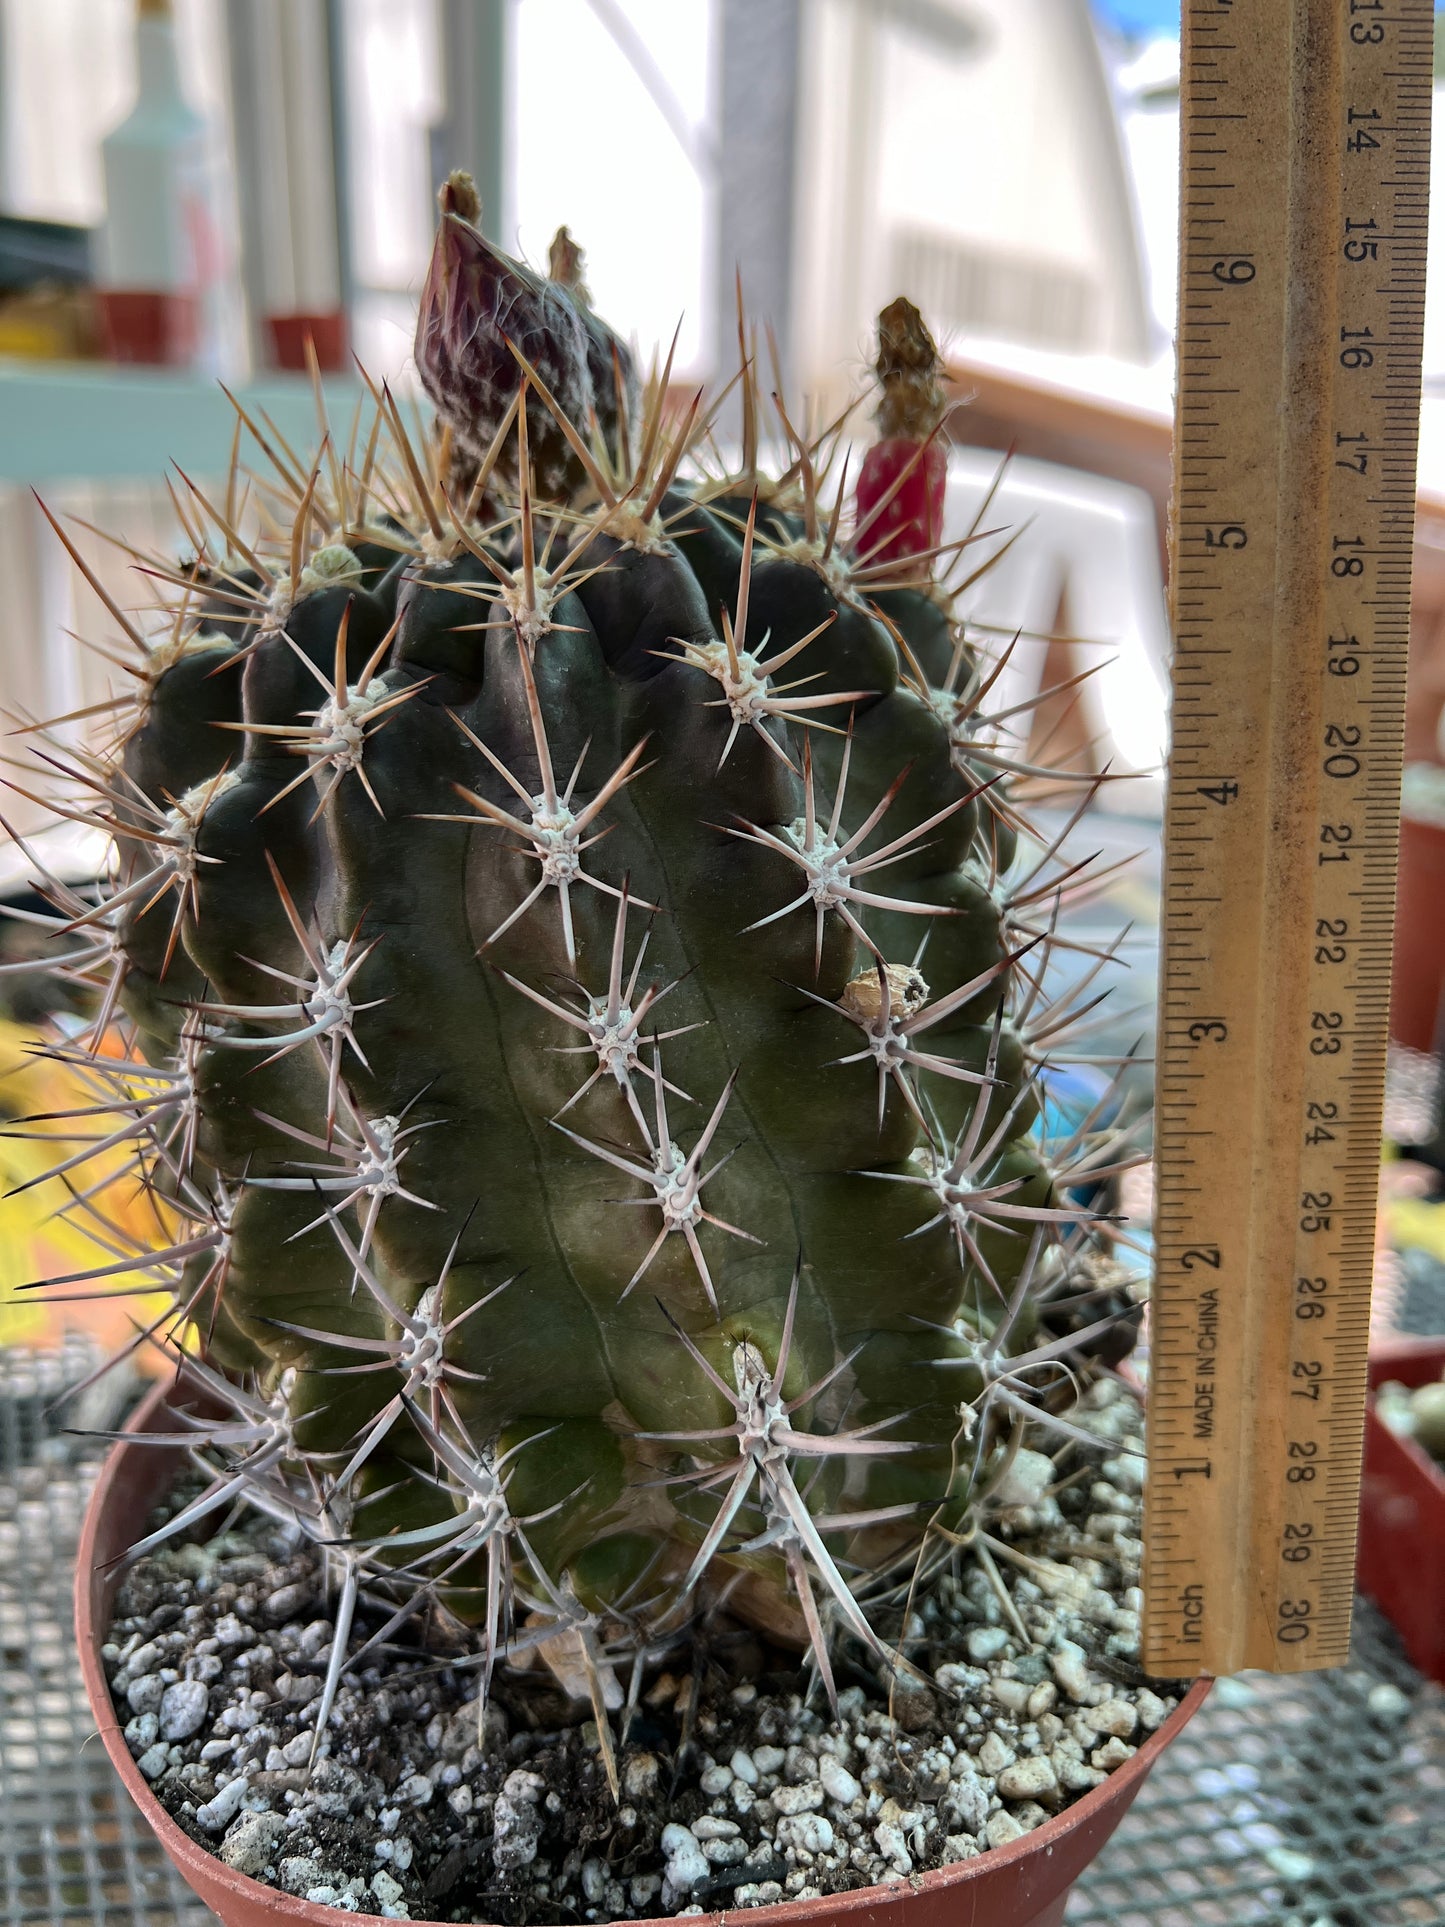 Neoporteria aspillagai cactus in 6 inch pot from collection